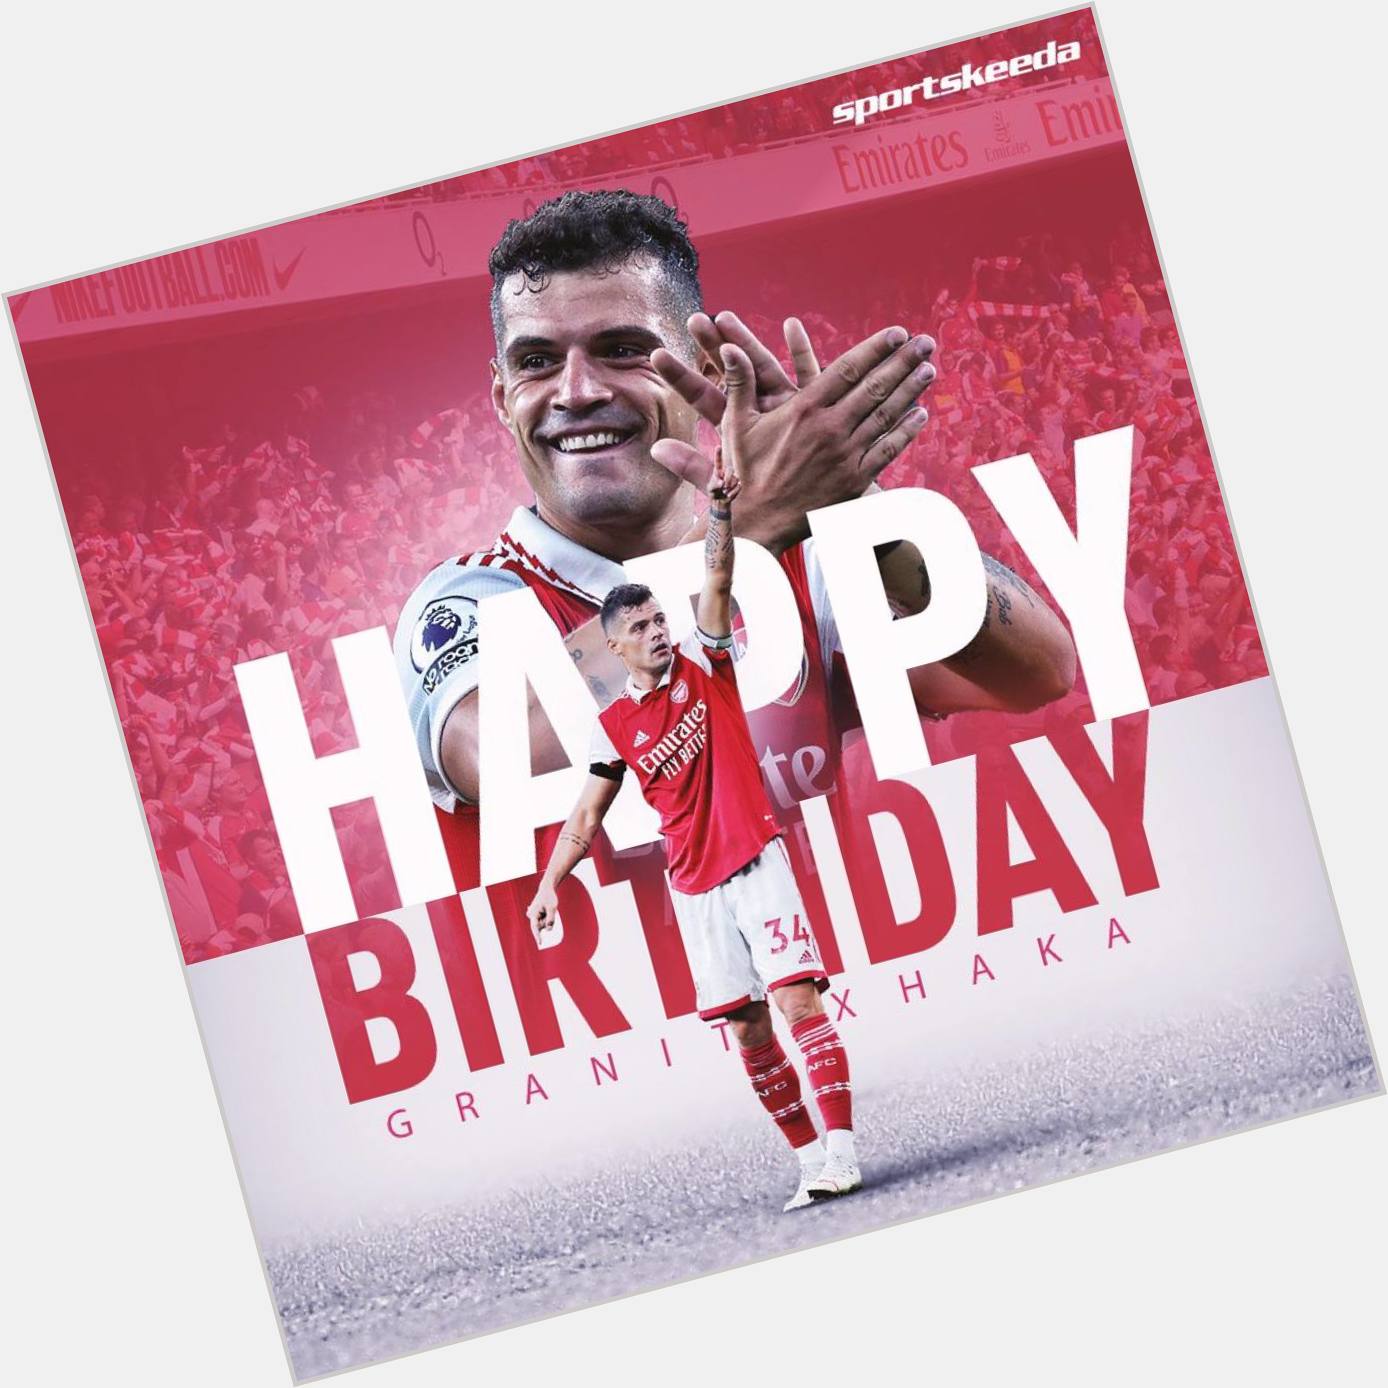  Leader on the pitch, a commander with the ball. A very Happy Birthday to GRANIT XHAKA. He is 30 Today.   